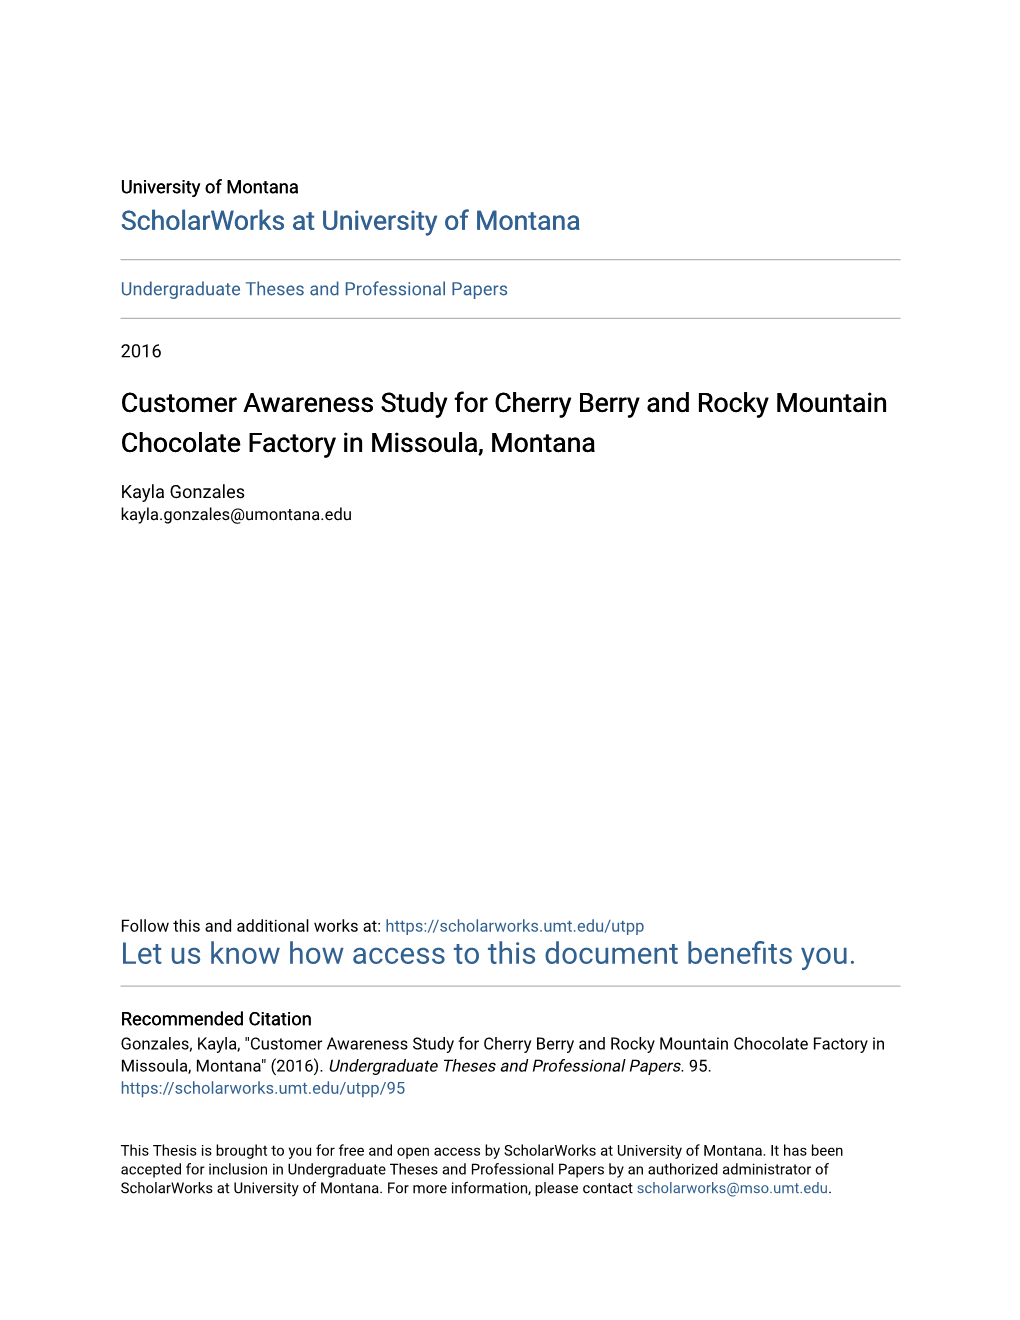 Customer Awareness Study for Cherry Berry and Rocky Mountain Chocolate Factory in Missoula, Montana